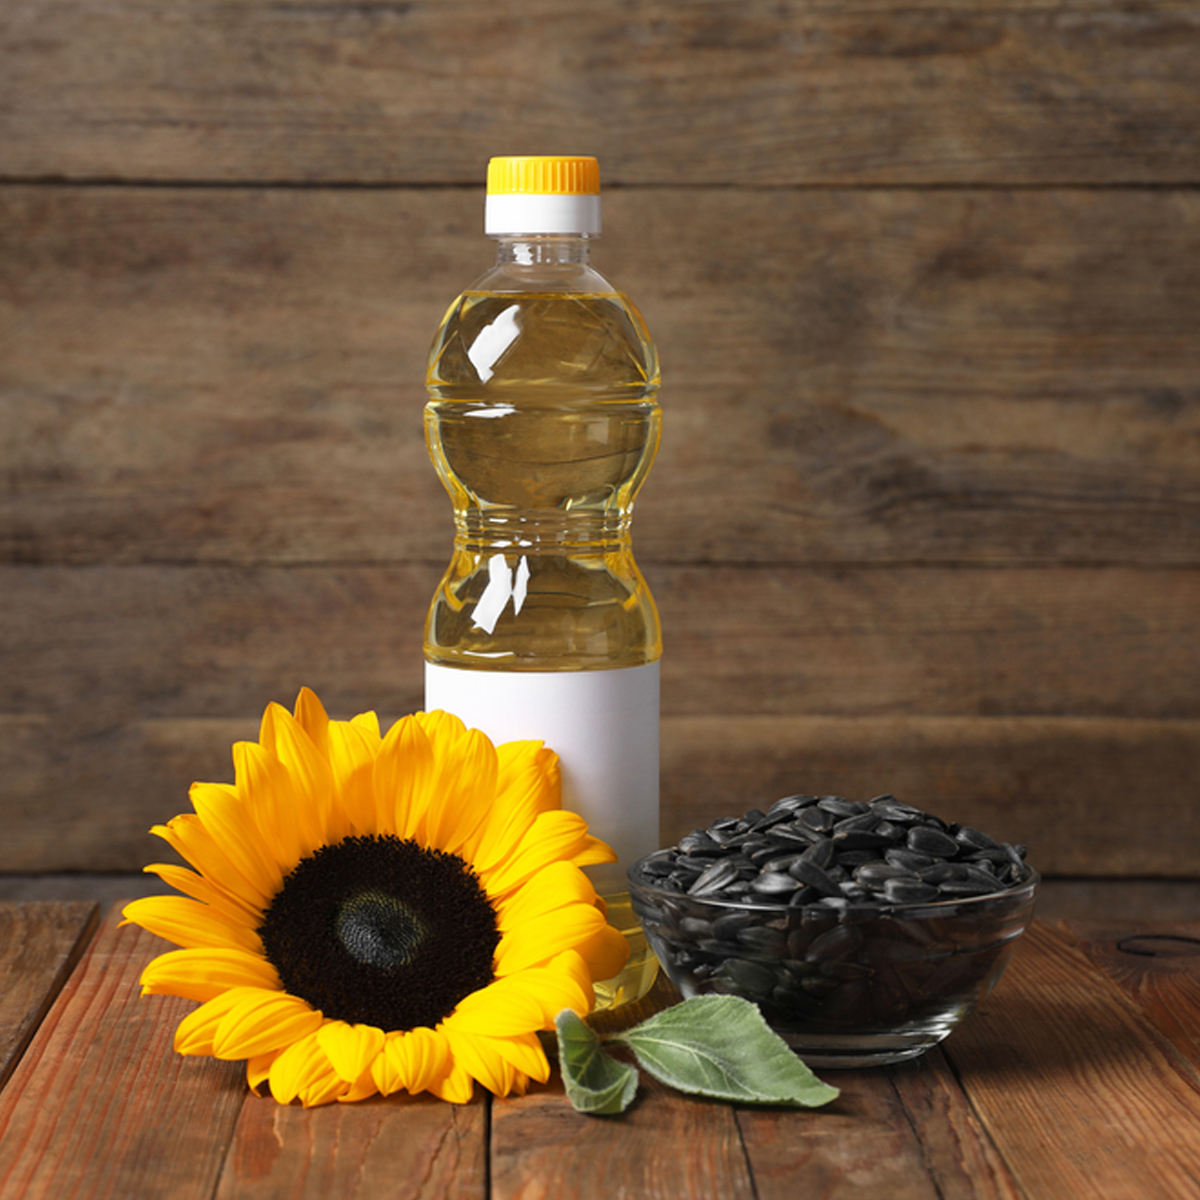 A plastic bottle of sunflower oil with a bowl of sunflower seeds beside it and a sunflower in the foreground.